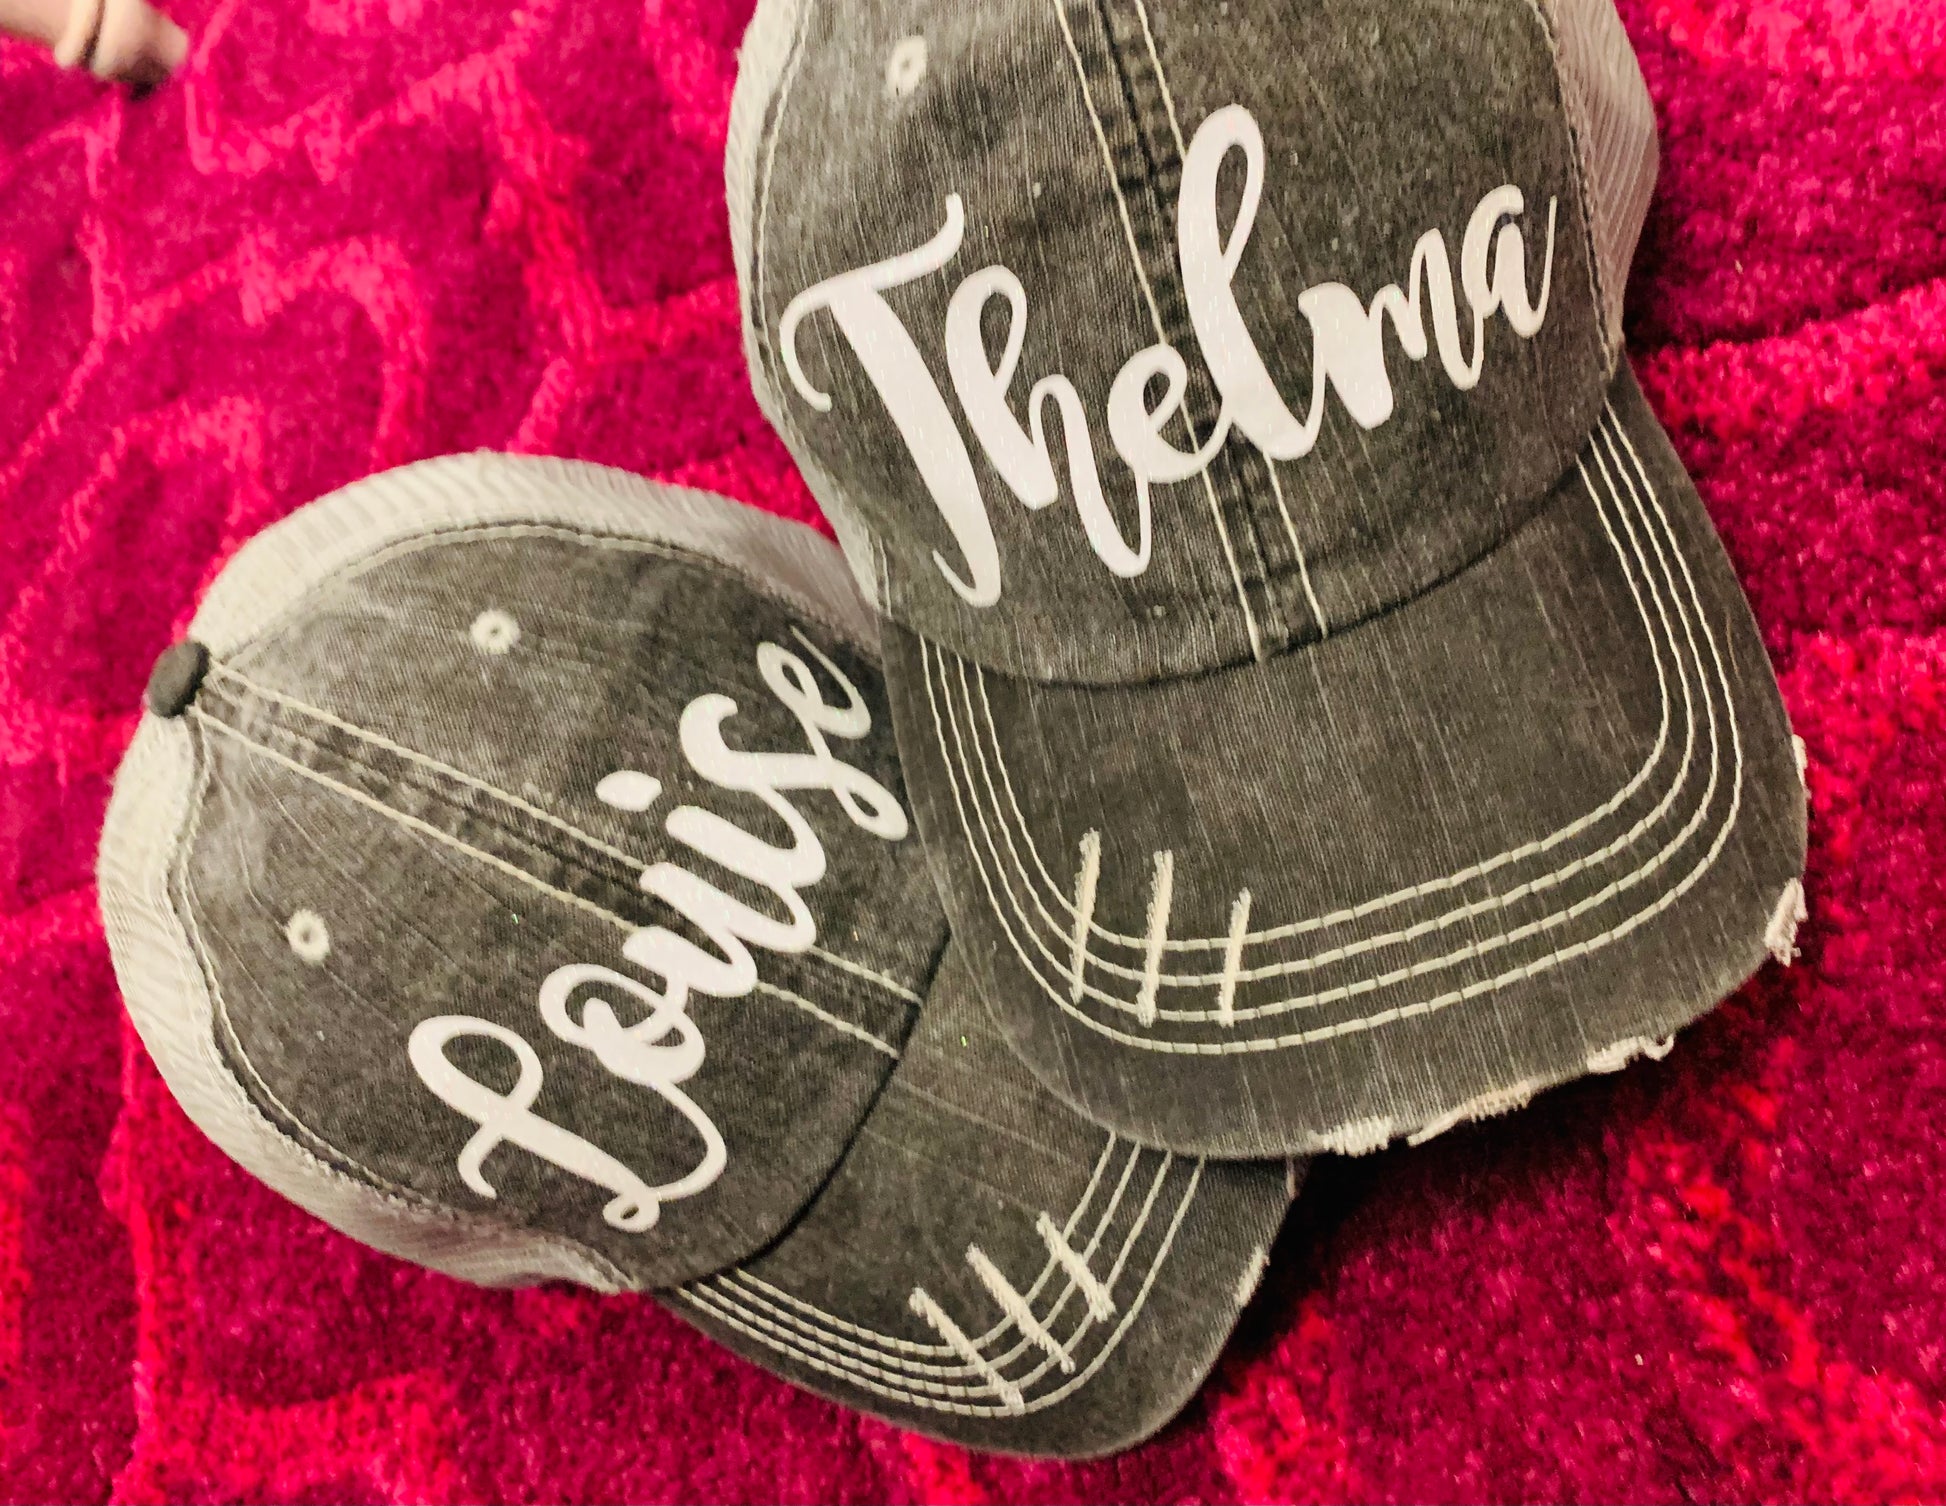 Thelma and Louise Hats (Thelma)